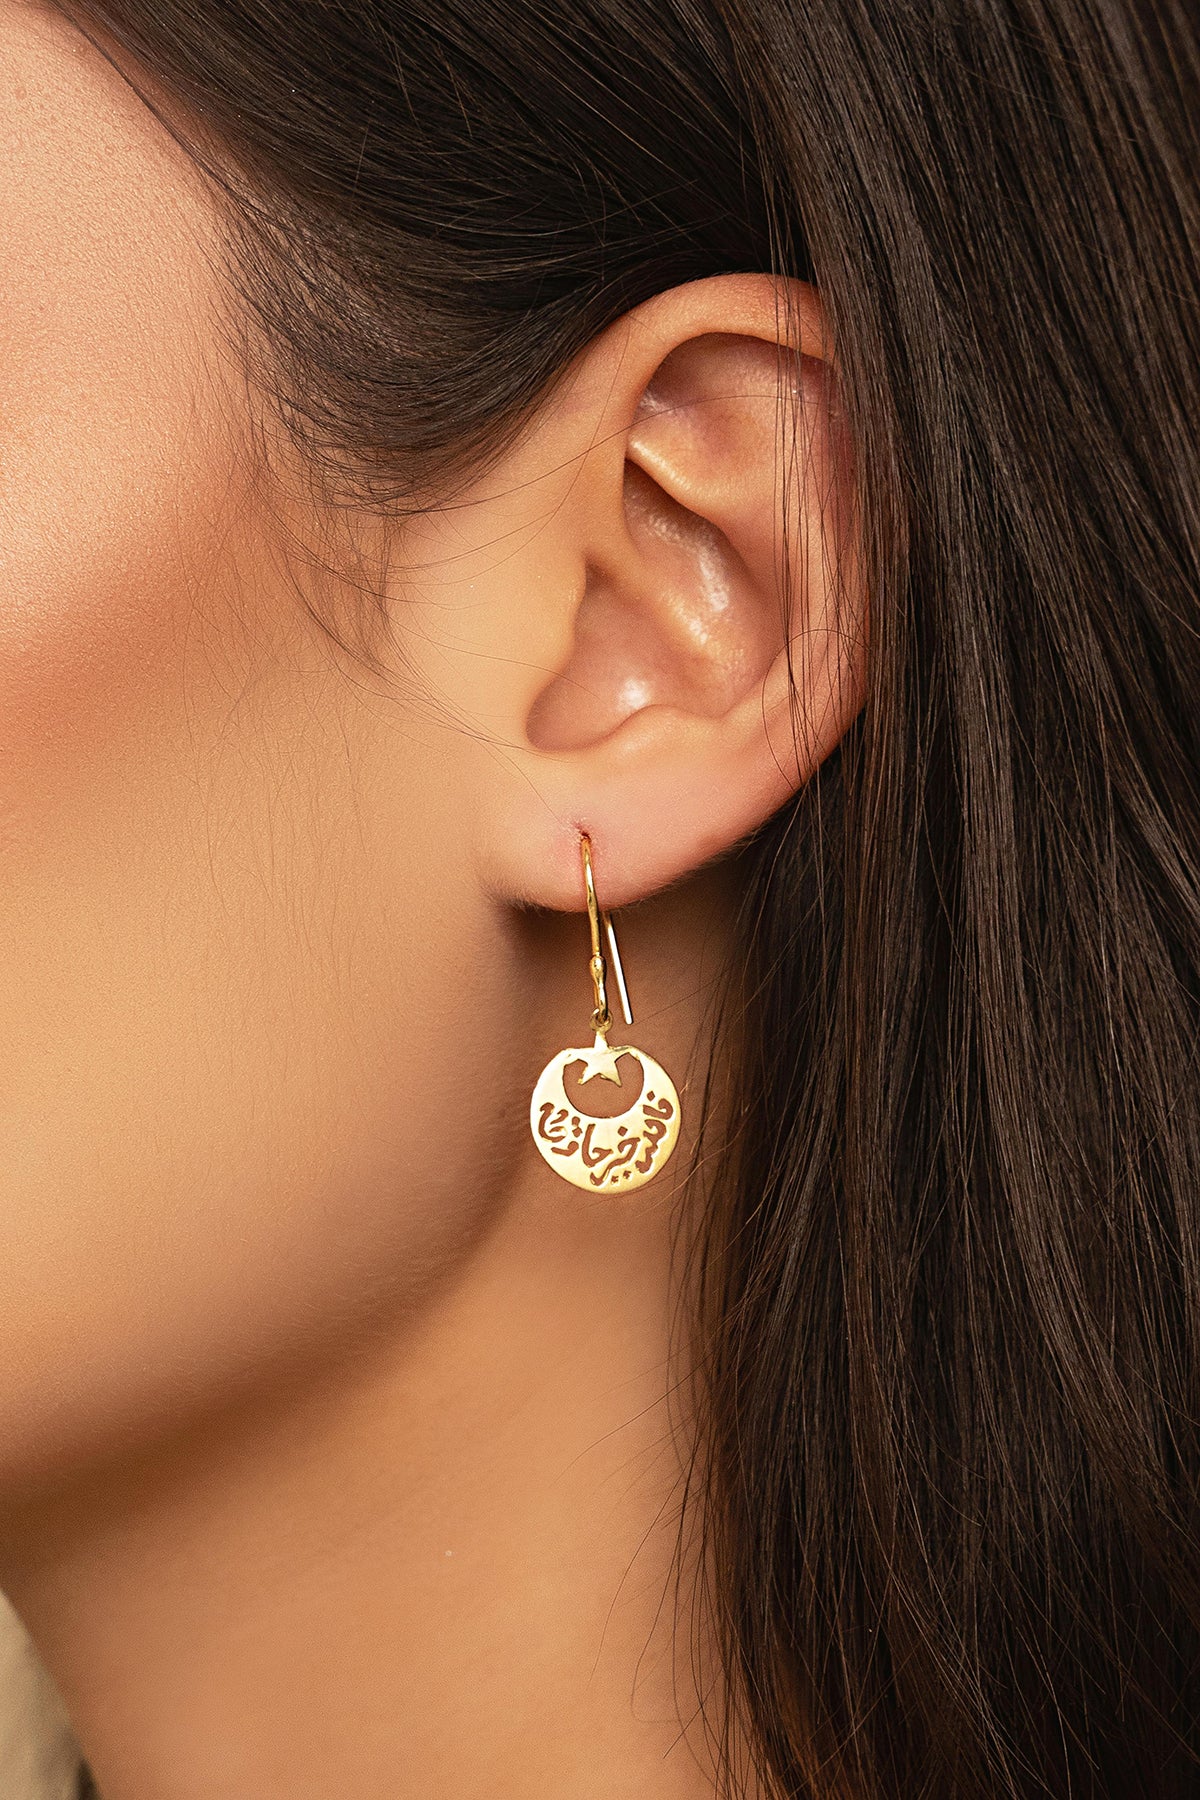 Crescent and star (Allah Khair Hafez) Drop Earrings in 18k Yellow Gold